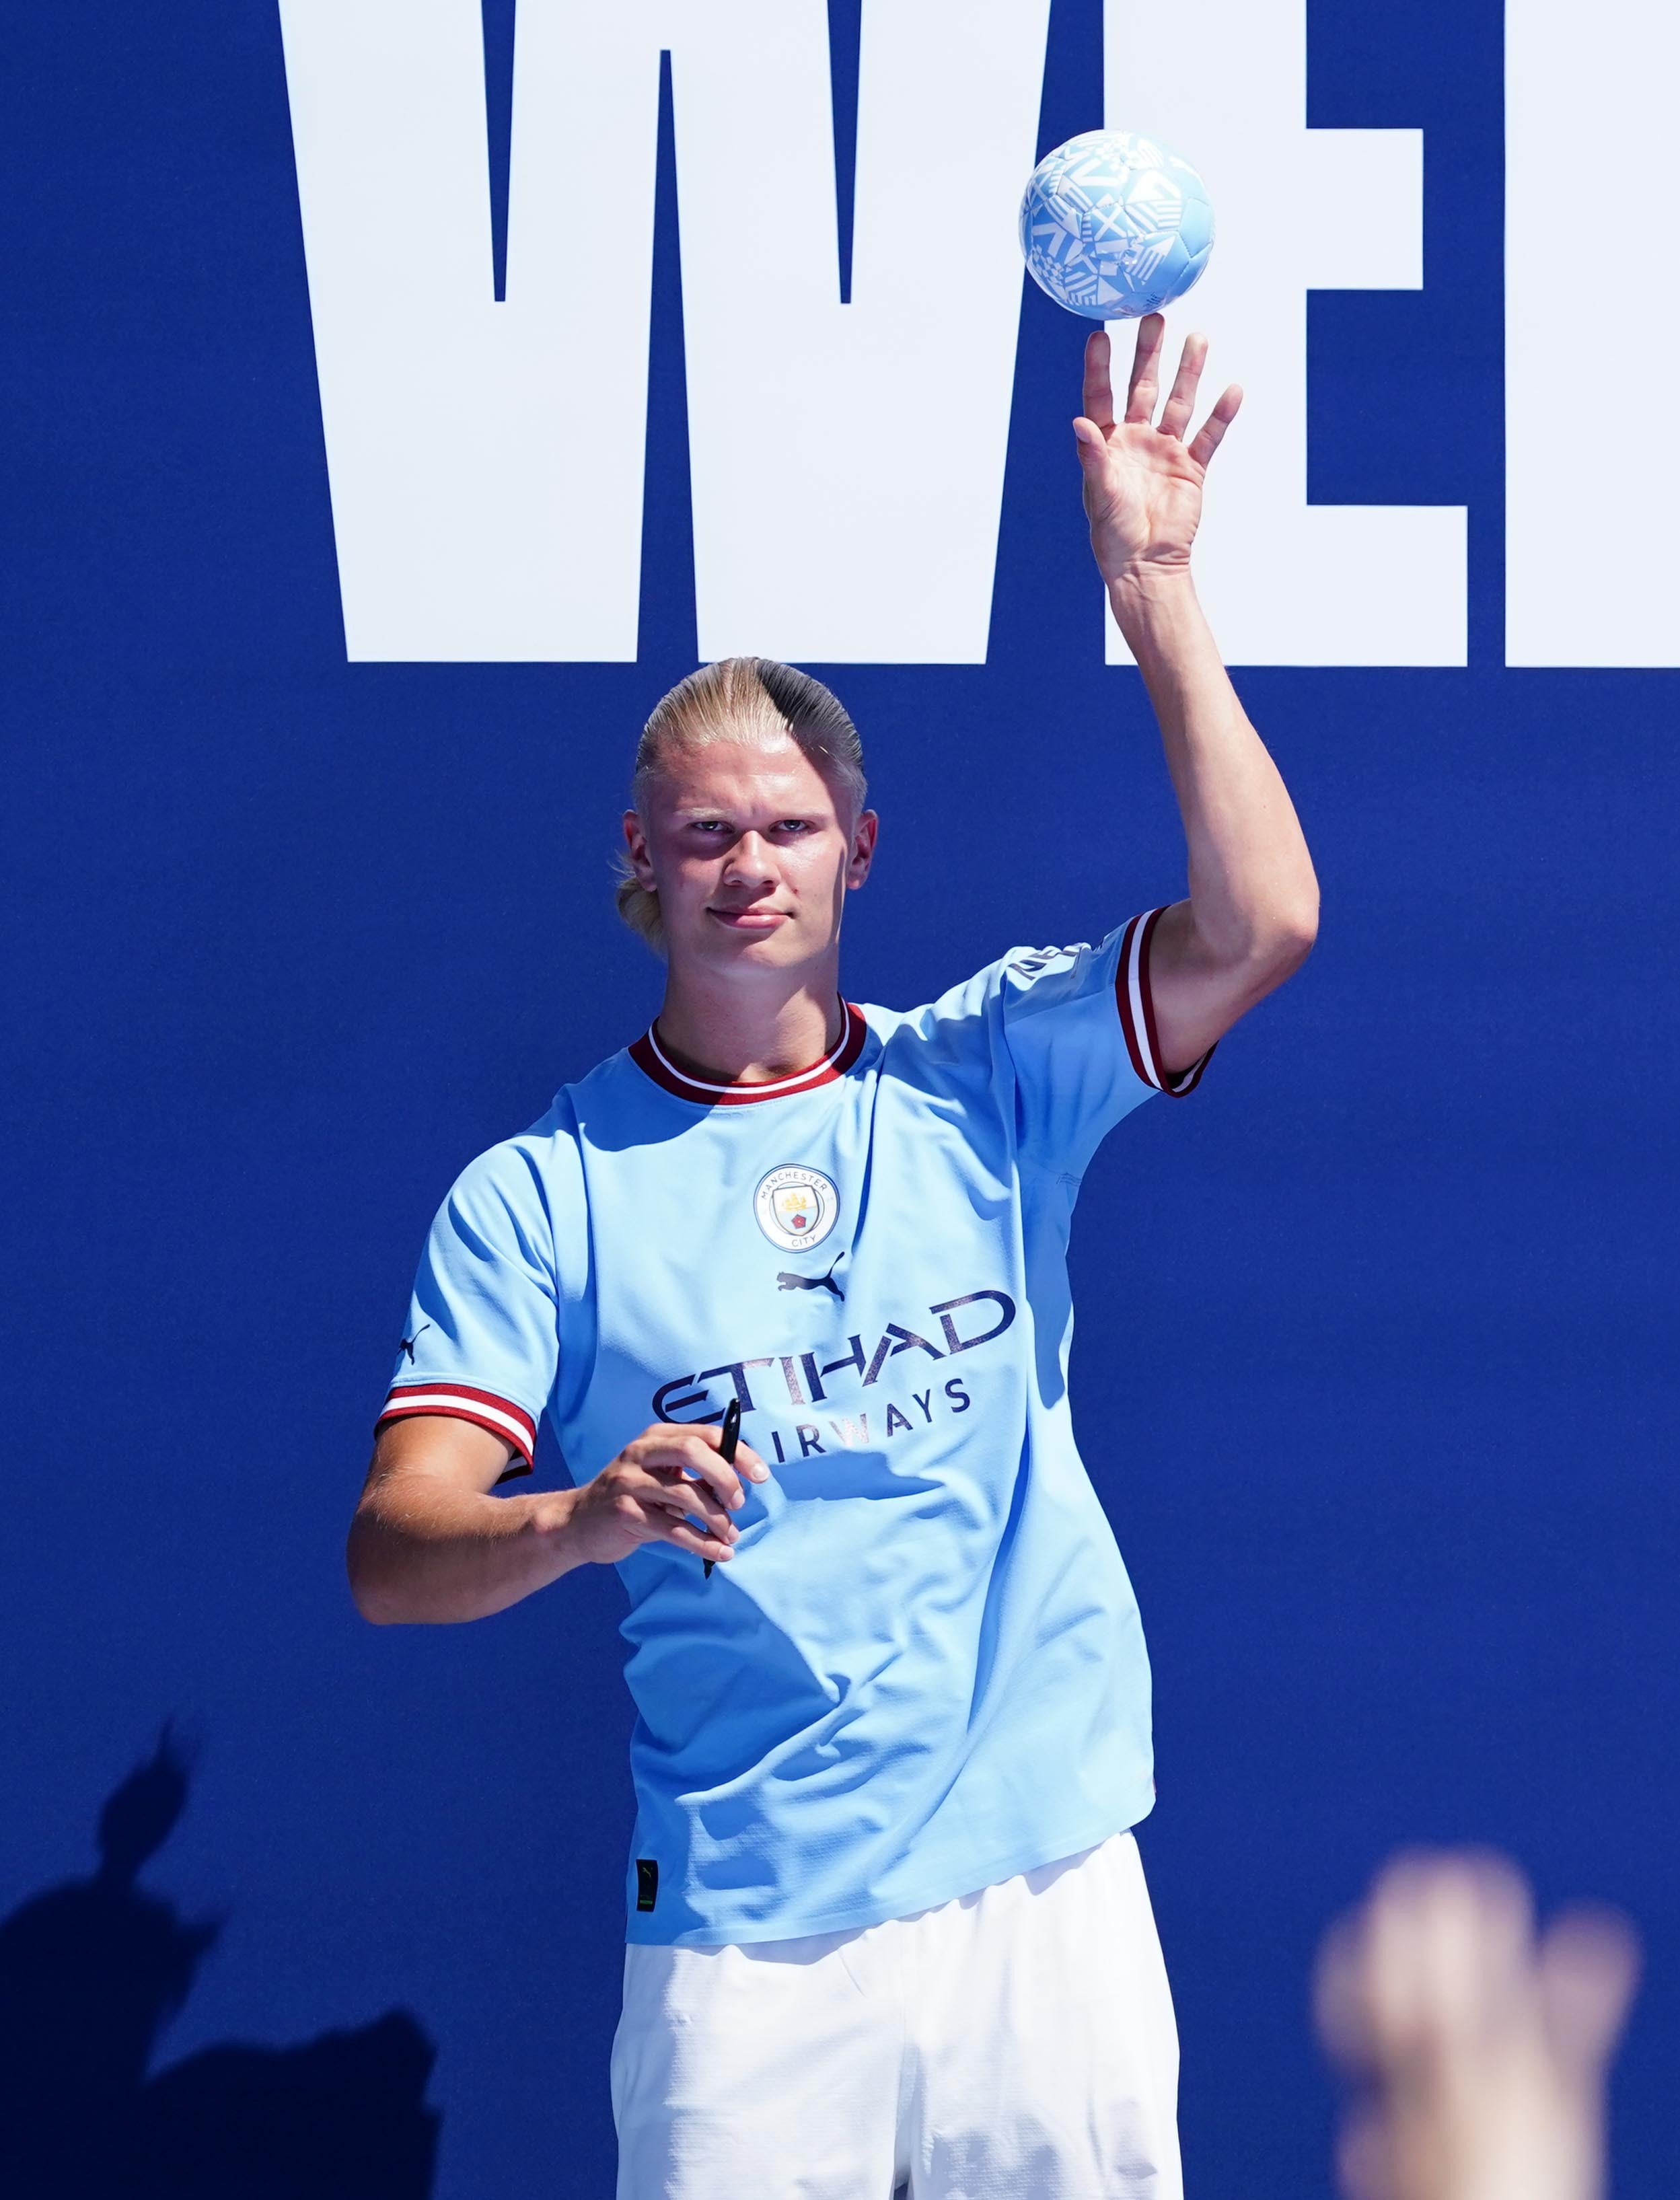 New Manchester City signing Erling Haaland had fun with the crowd as he was presented to fans at a special event at the Etihad Stadium (Martin Rickett/PA)